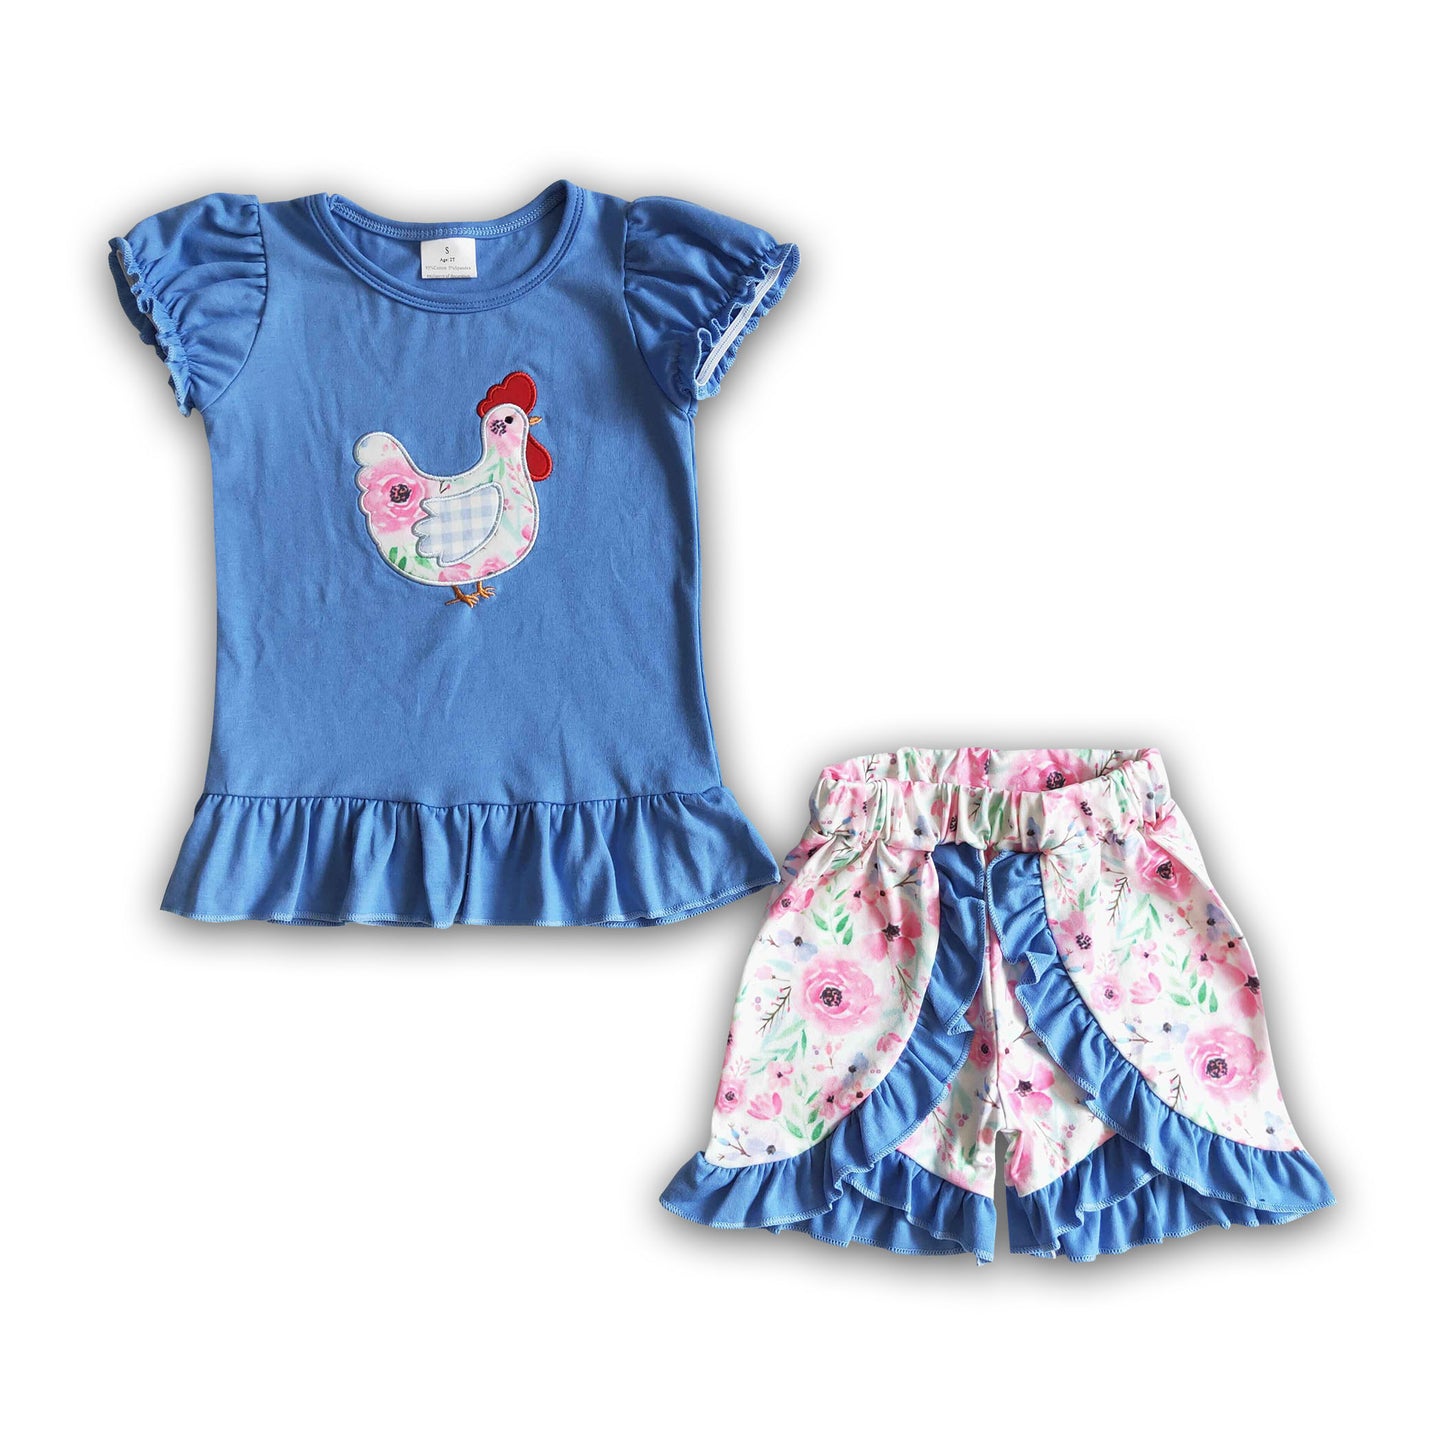 Chicken embroidery blue cotton shirt floral shirt girls clothing set